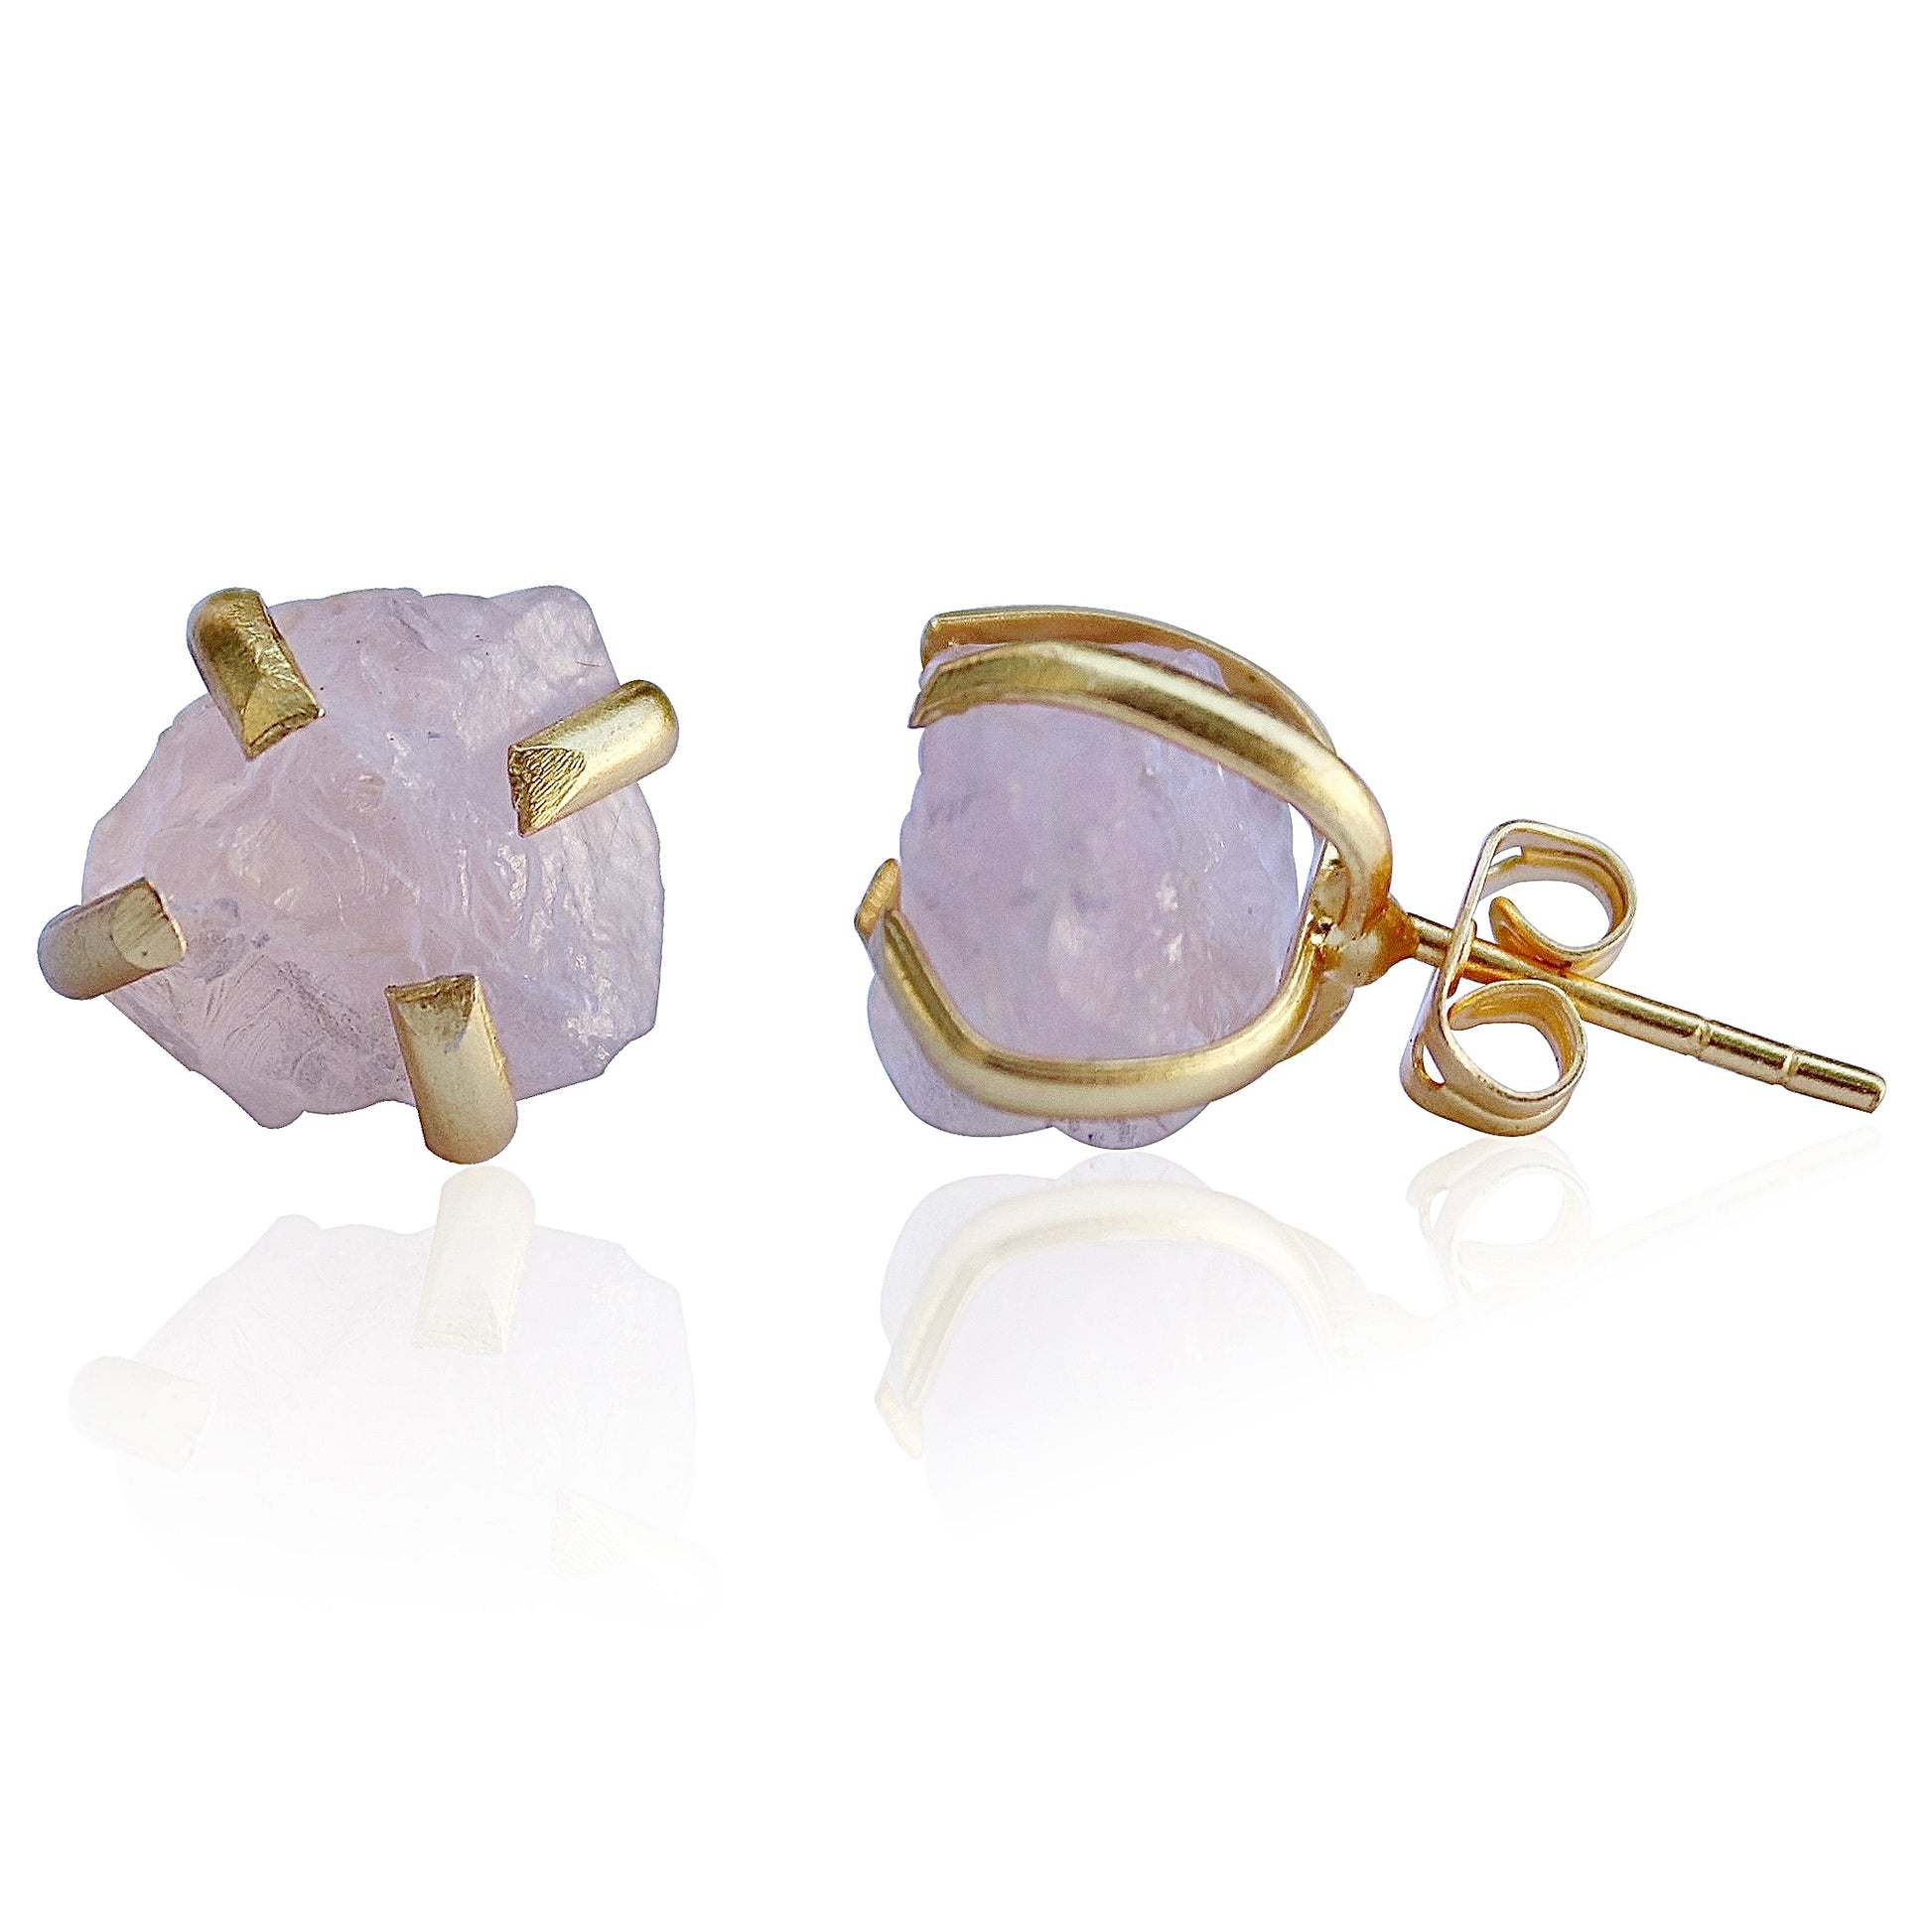 RAW NATURAL STONE STUD EARRINGS - AMETHYST - The Glam Harbor